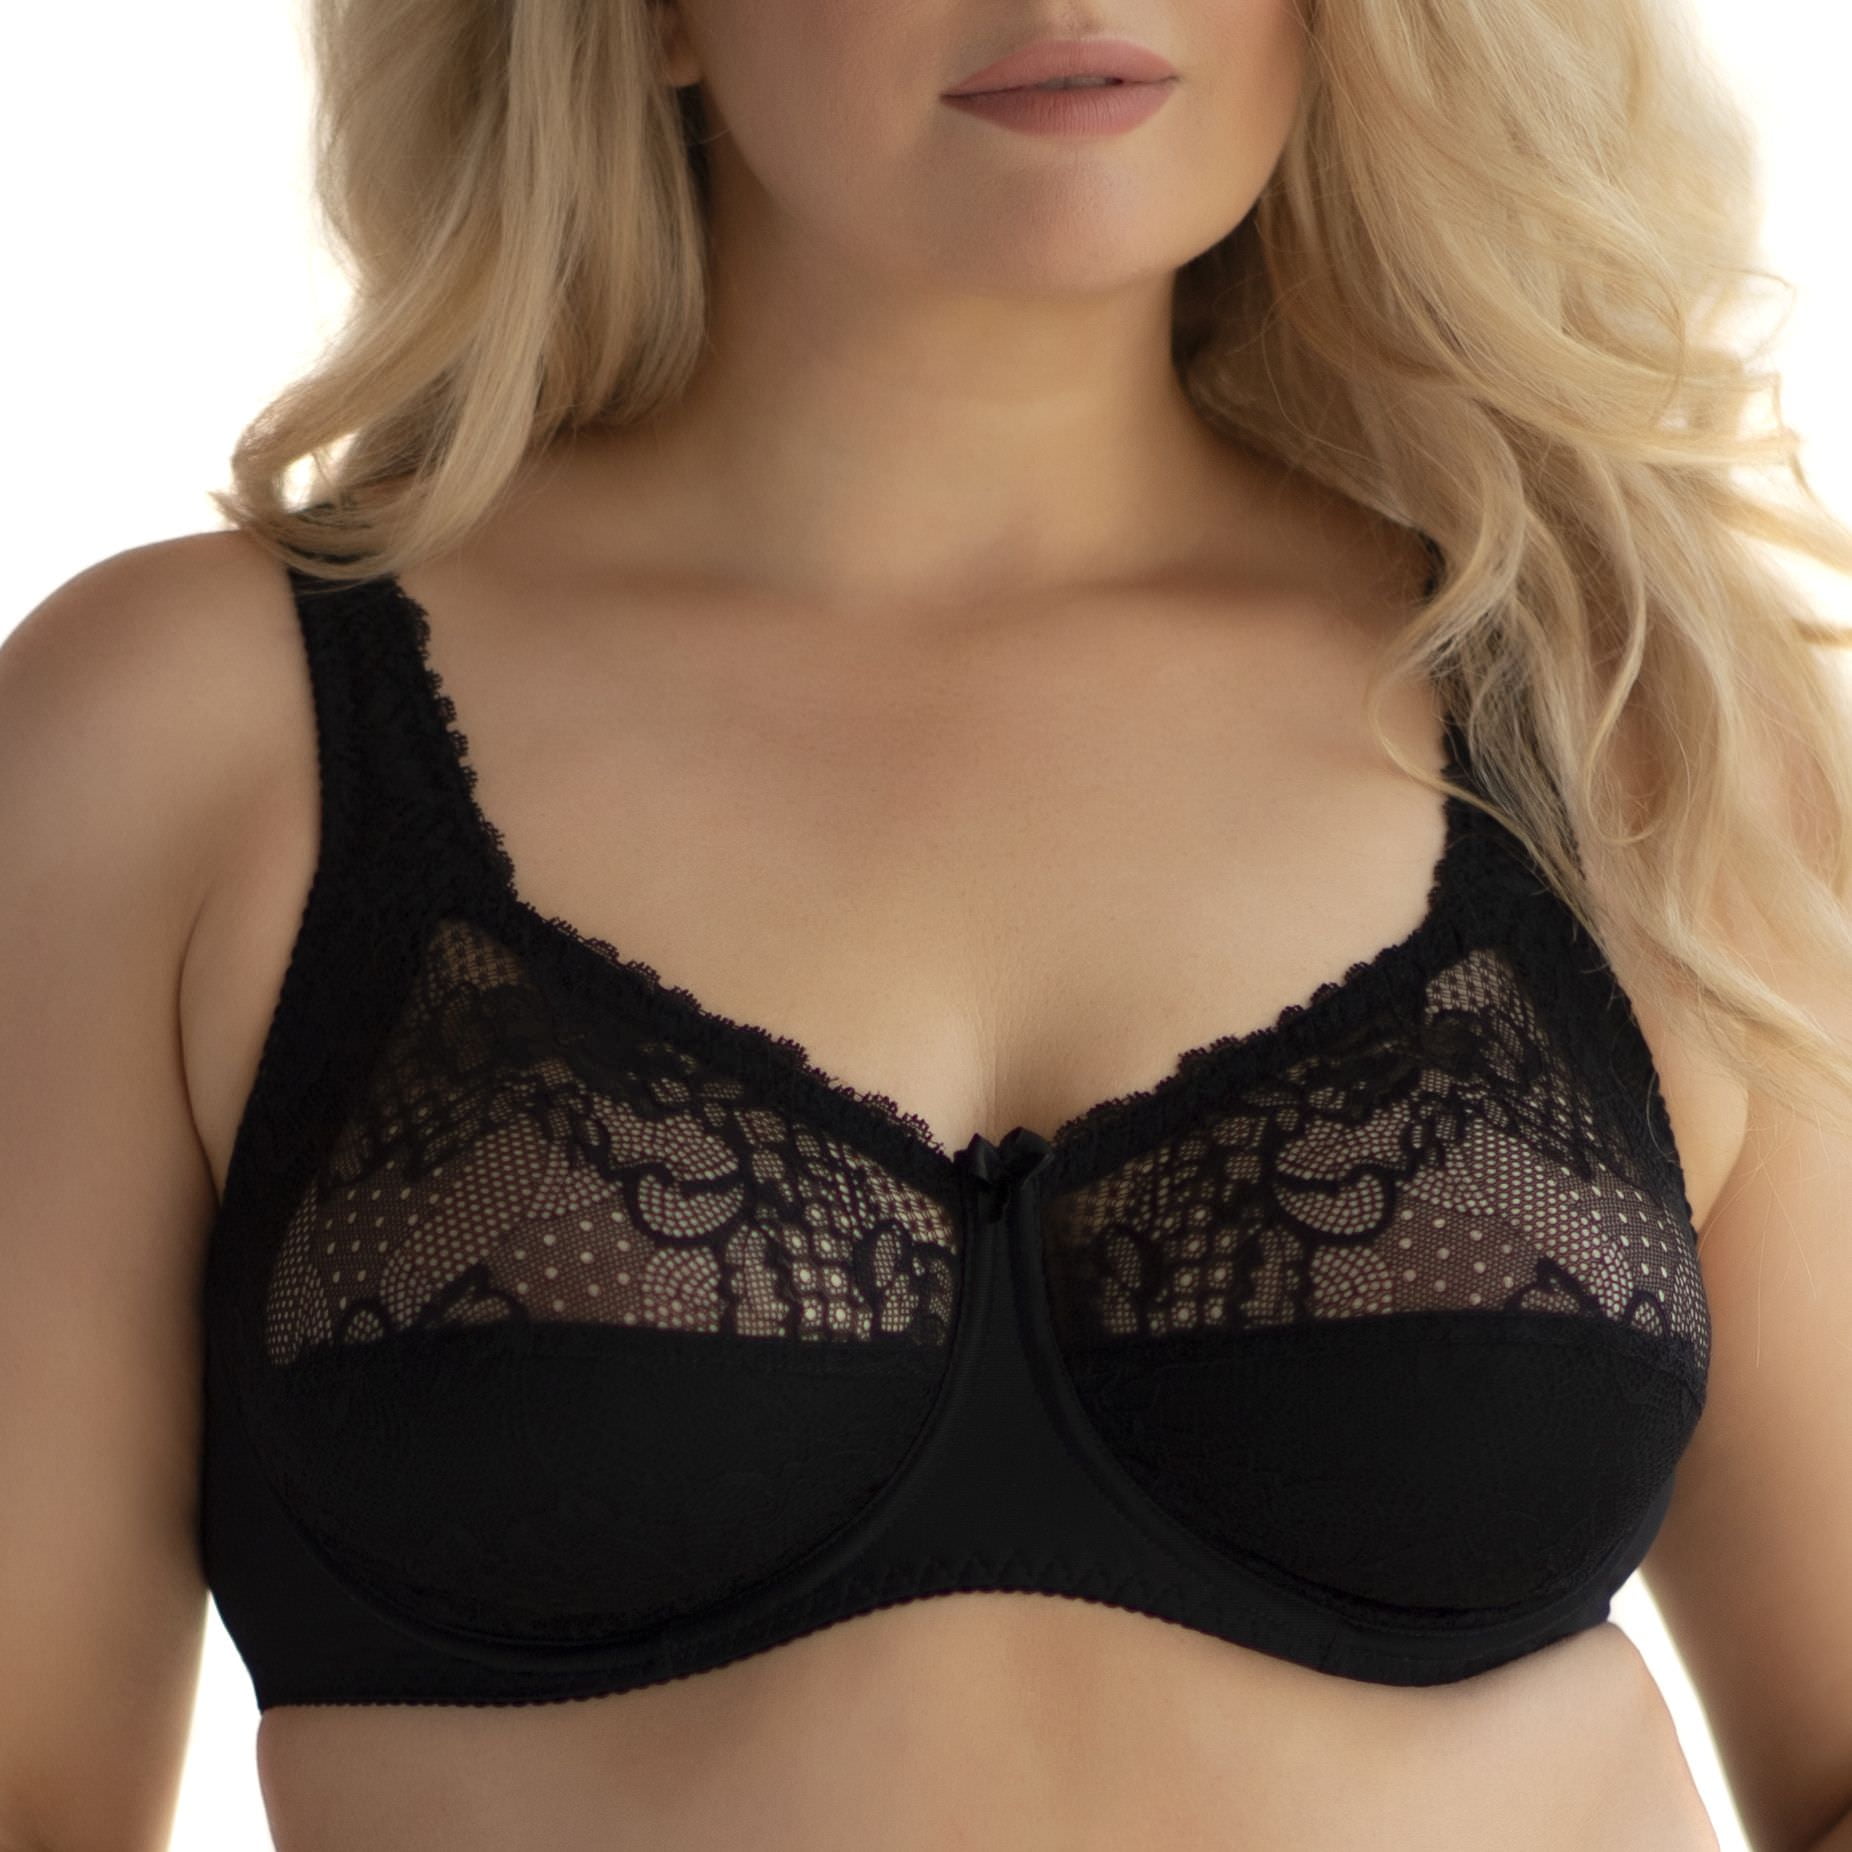 34 36 38 B cup Underwire